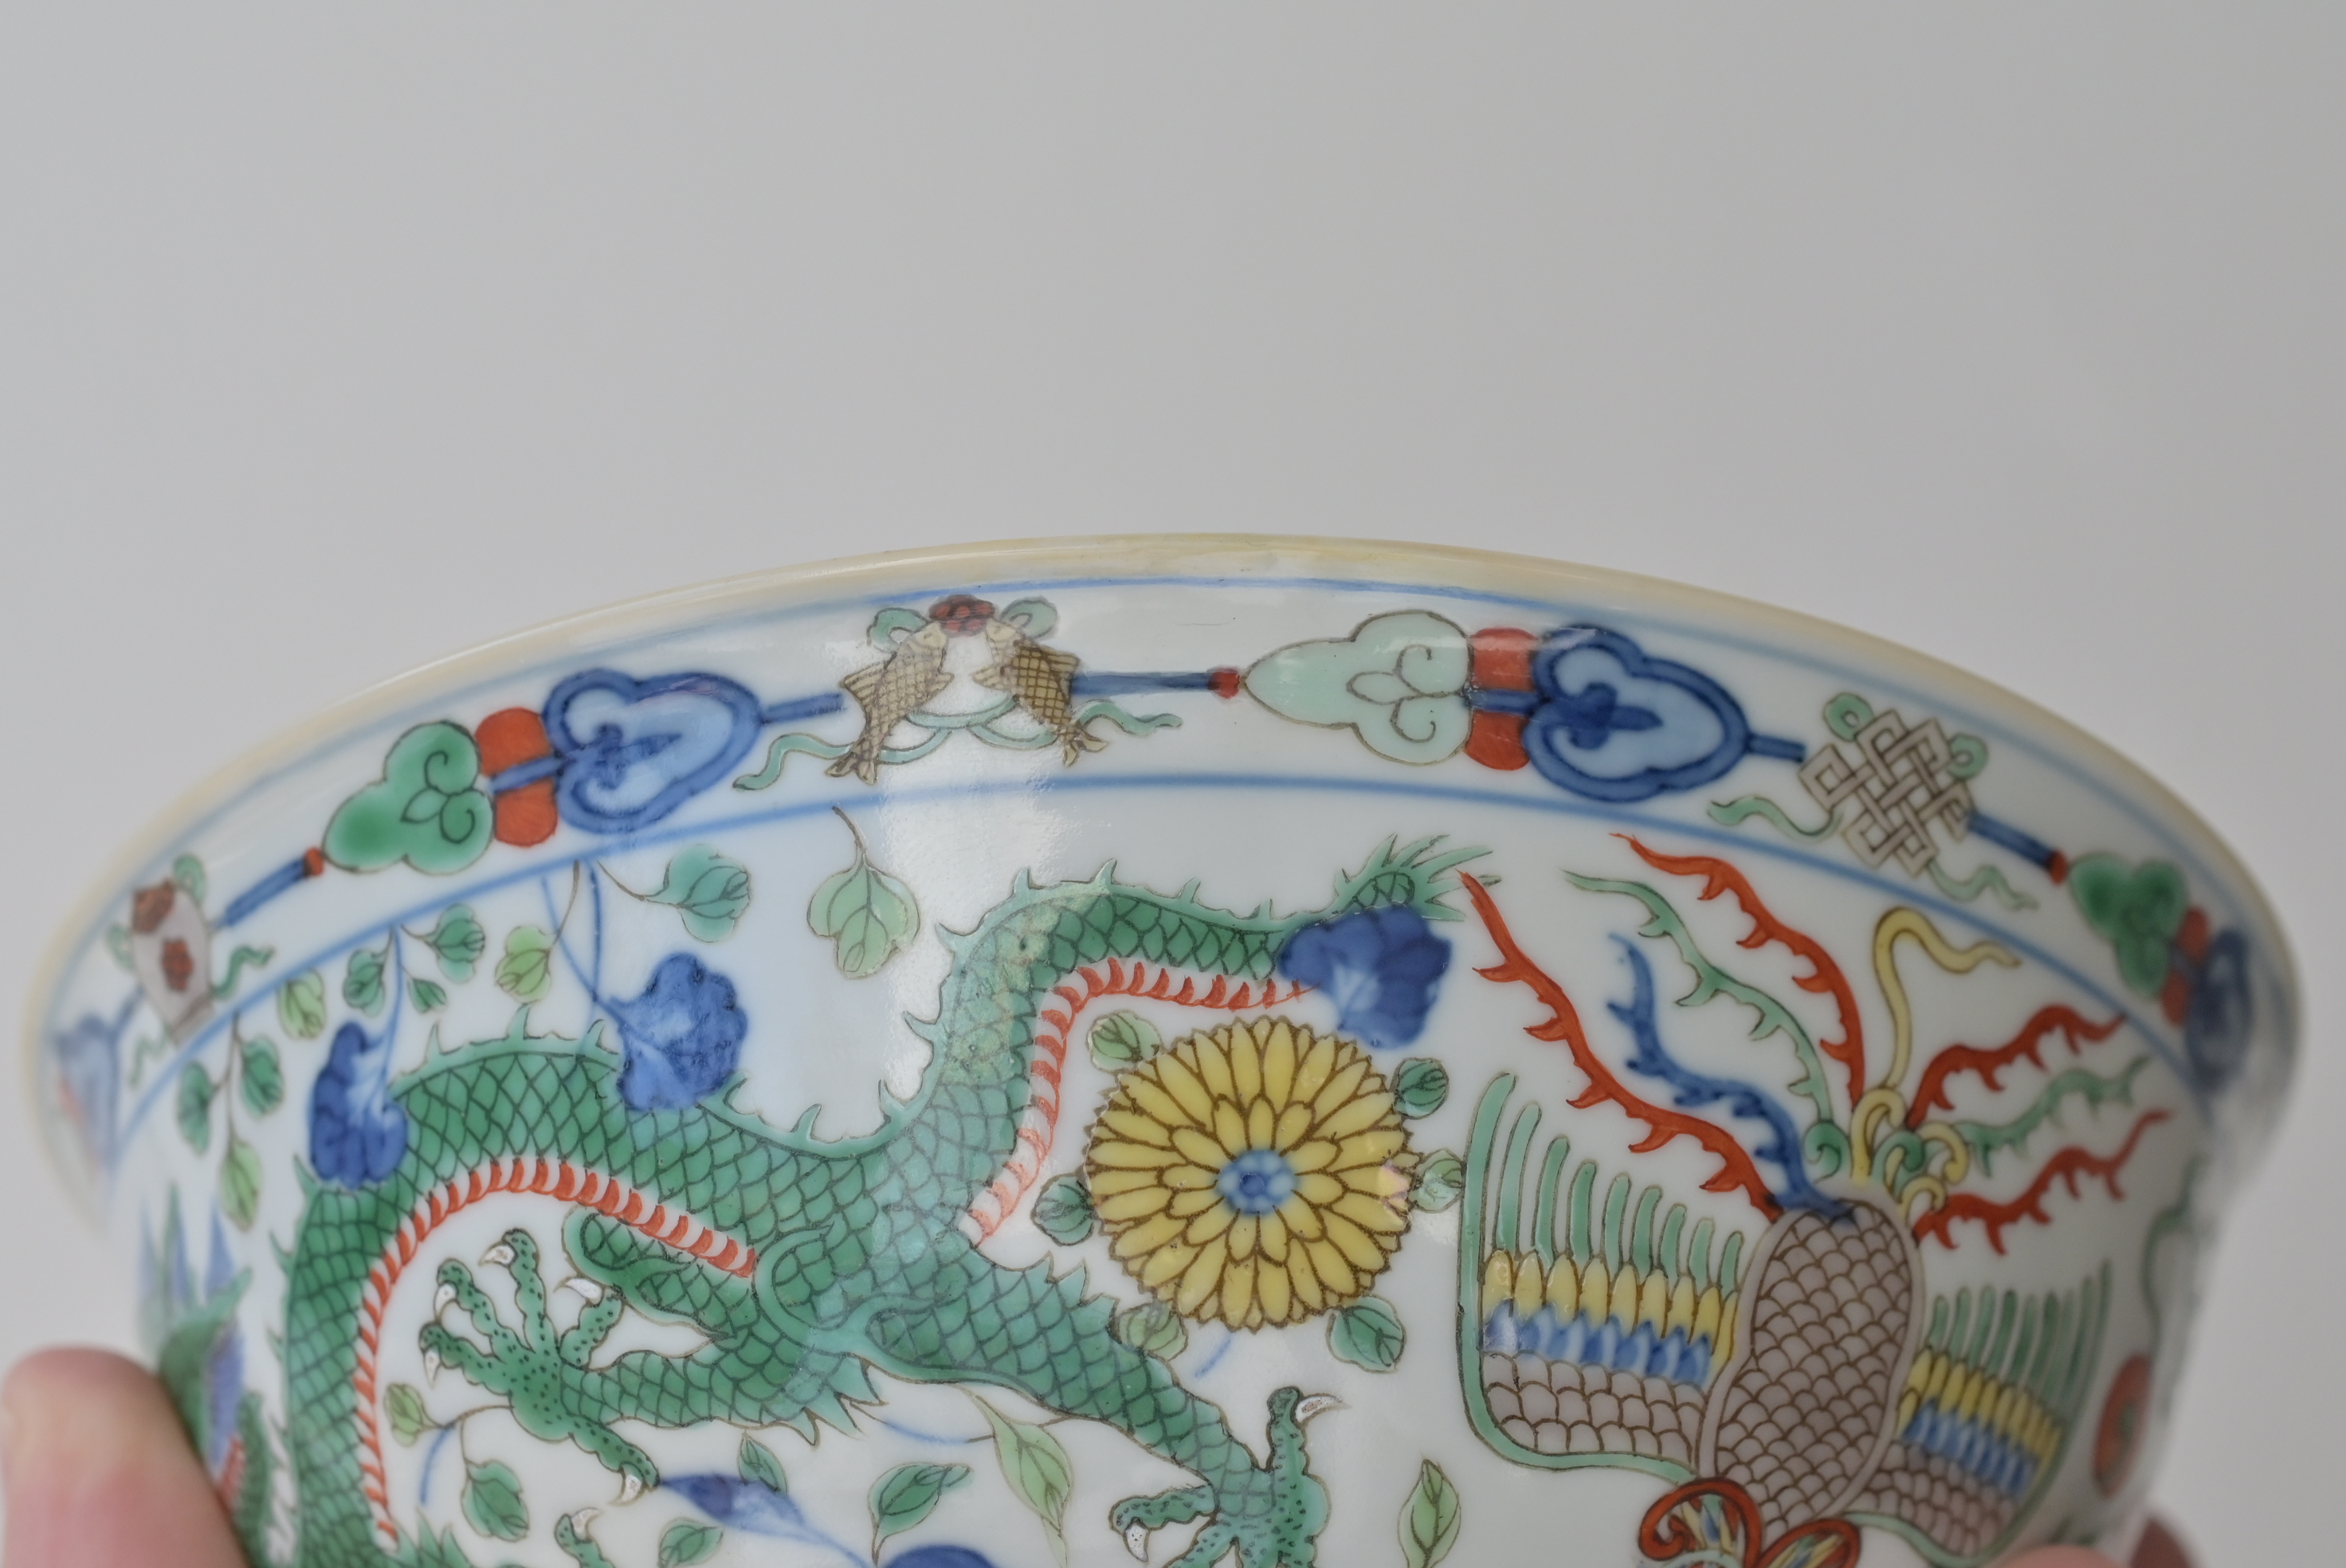 FINE CHINESE WUCAI ‘DRAGON & PHOENIX’ PORCELAIN BOWL, JIAQING MARK AND PERIOD, EARLY 19th CENTURY - Image 13 of 14